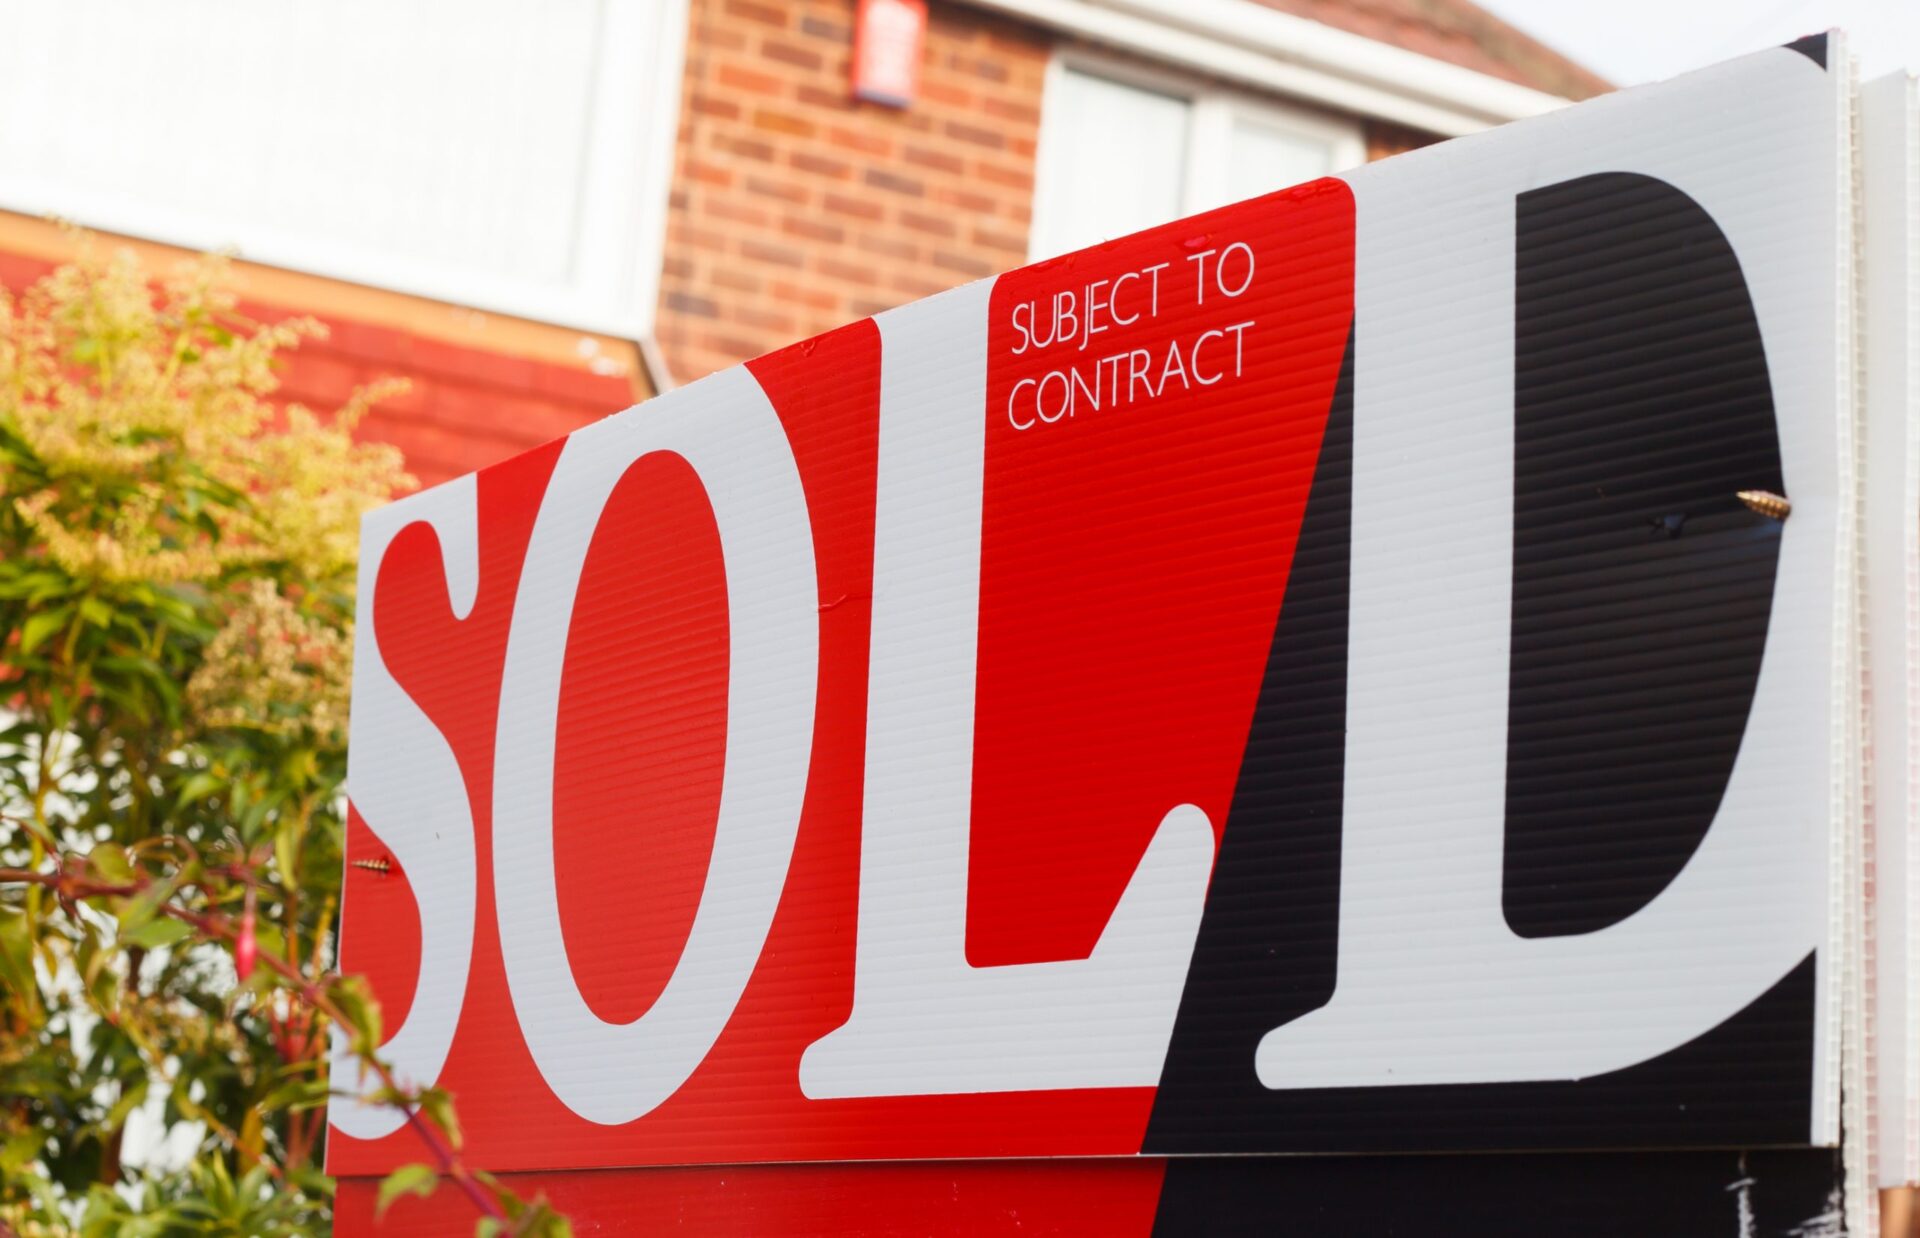 House Prices Surge 11% In One Year